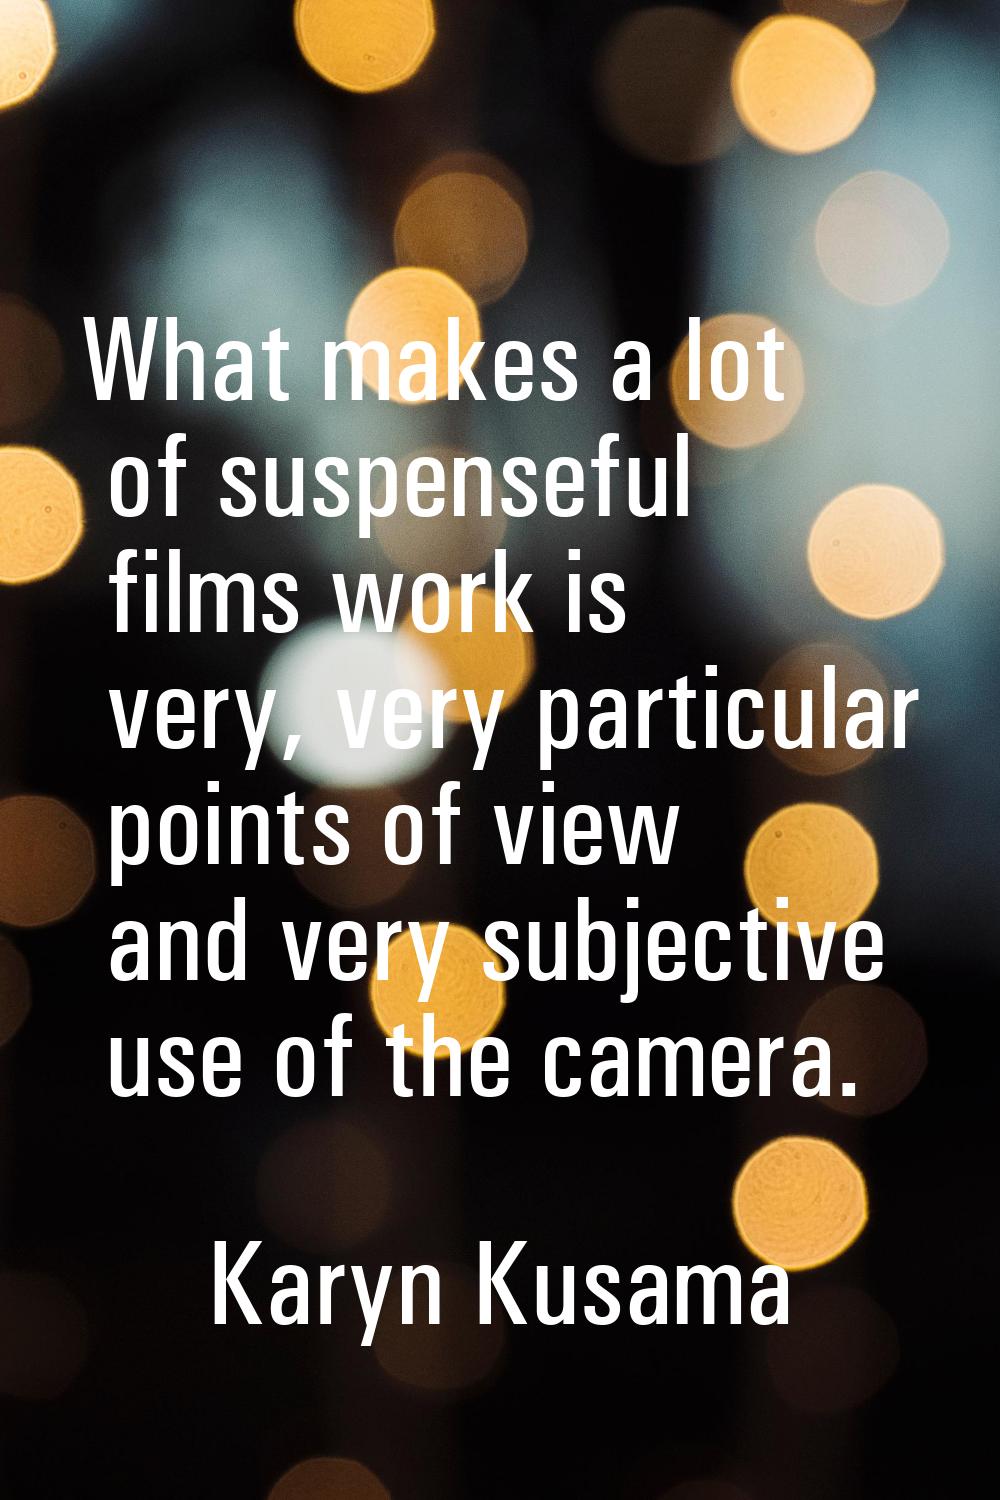 What makes a lot of suspenseful films work is very, very particular points of view and very subject